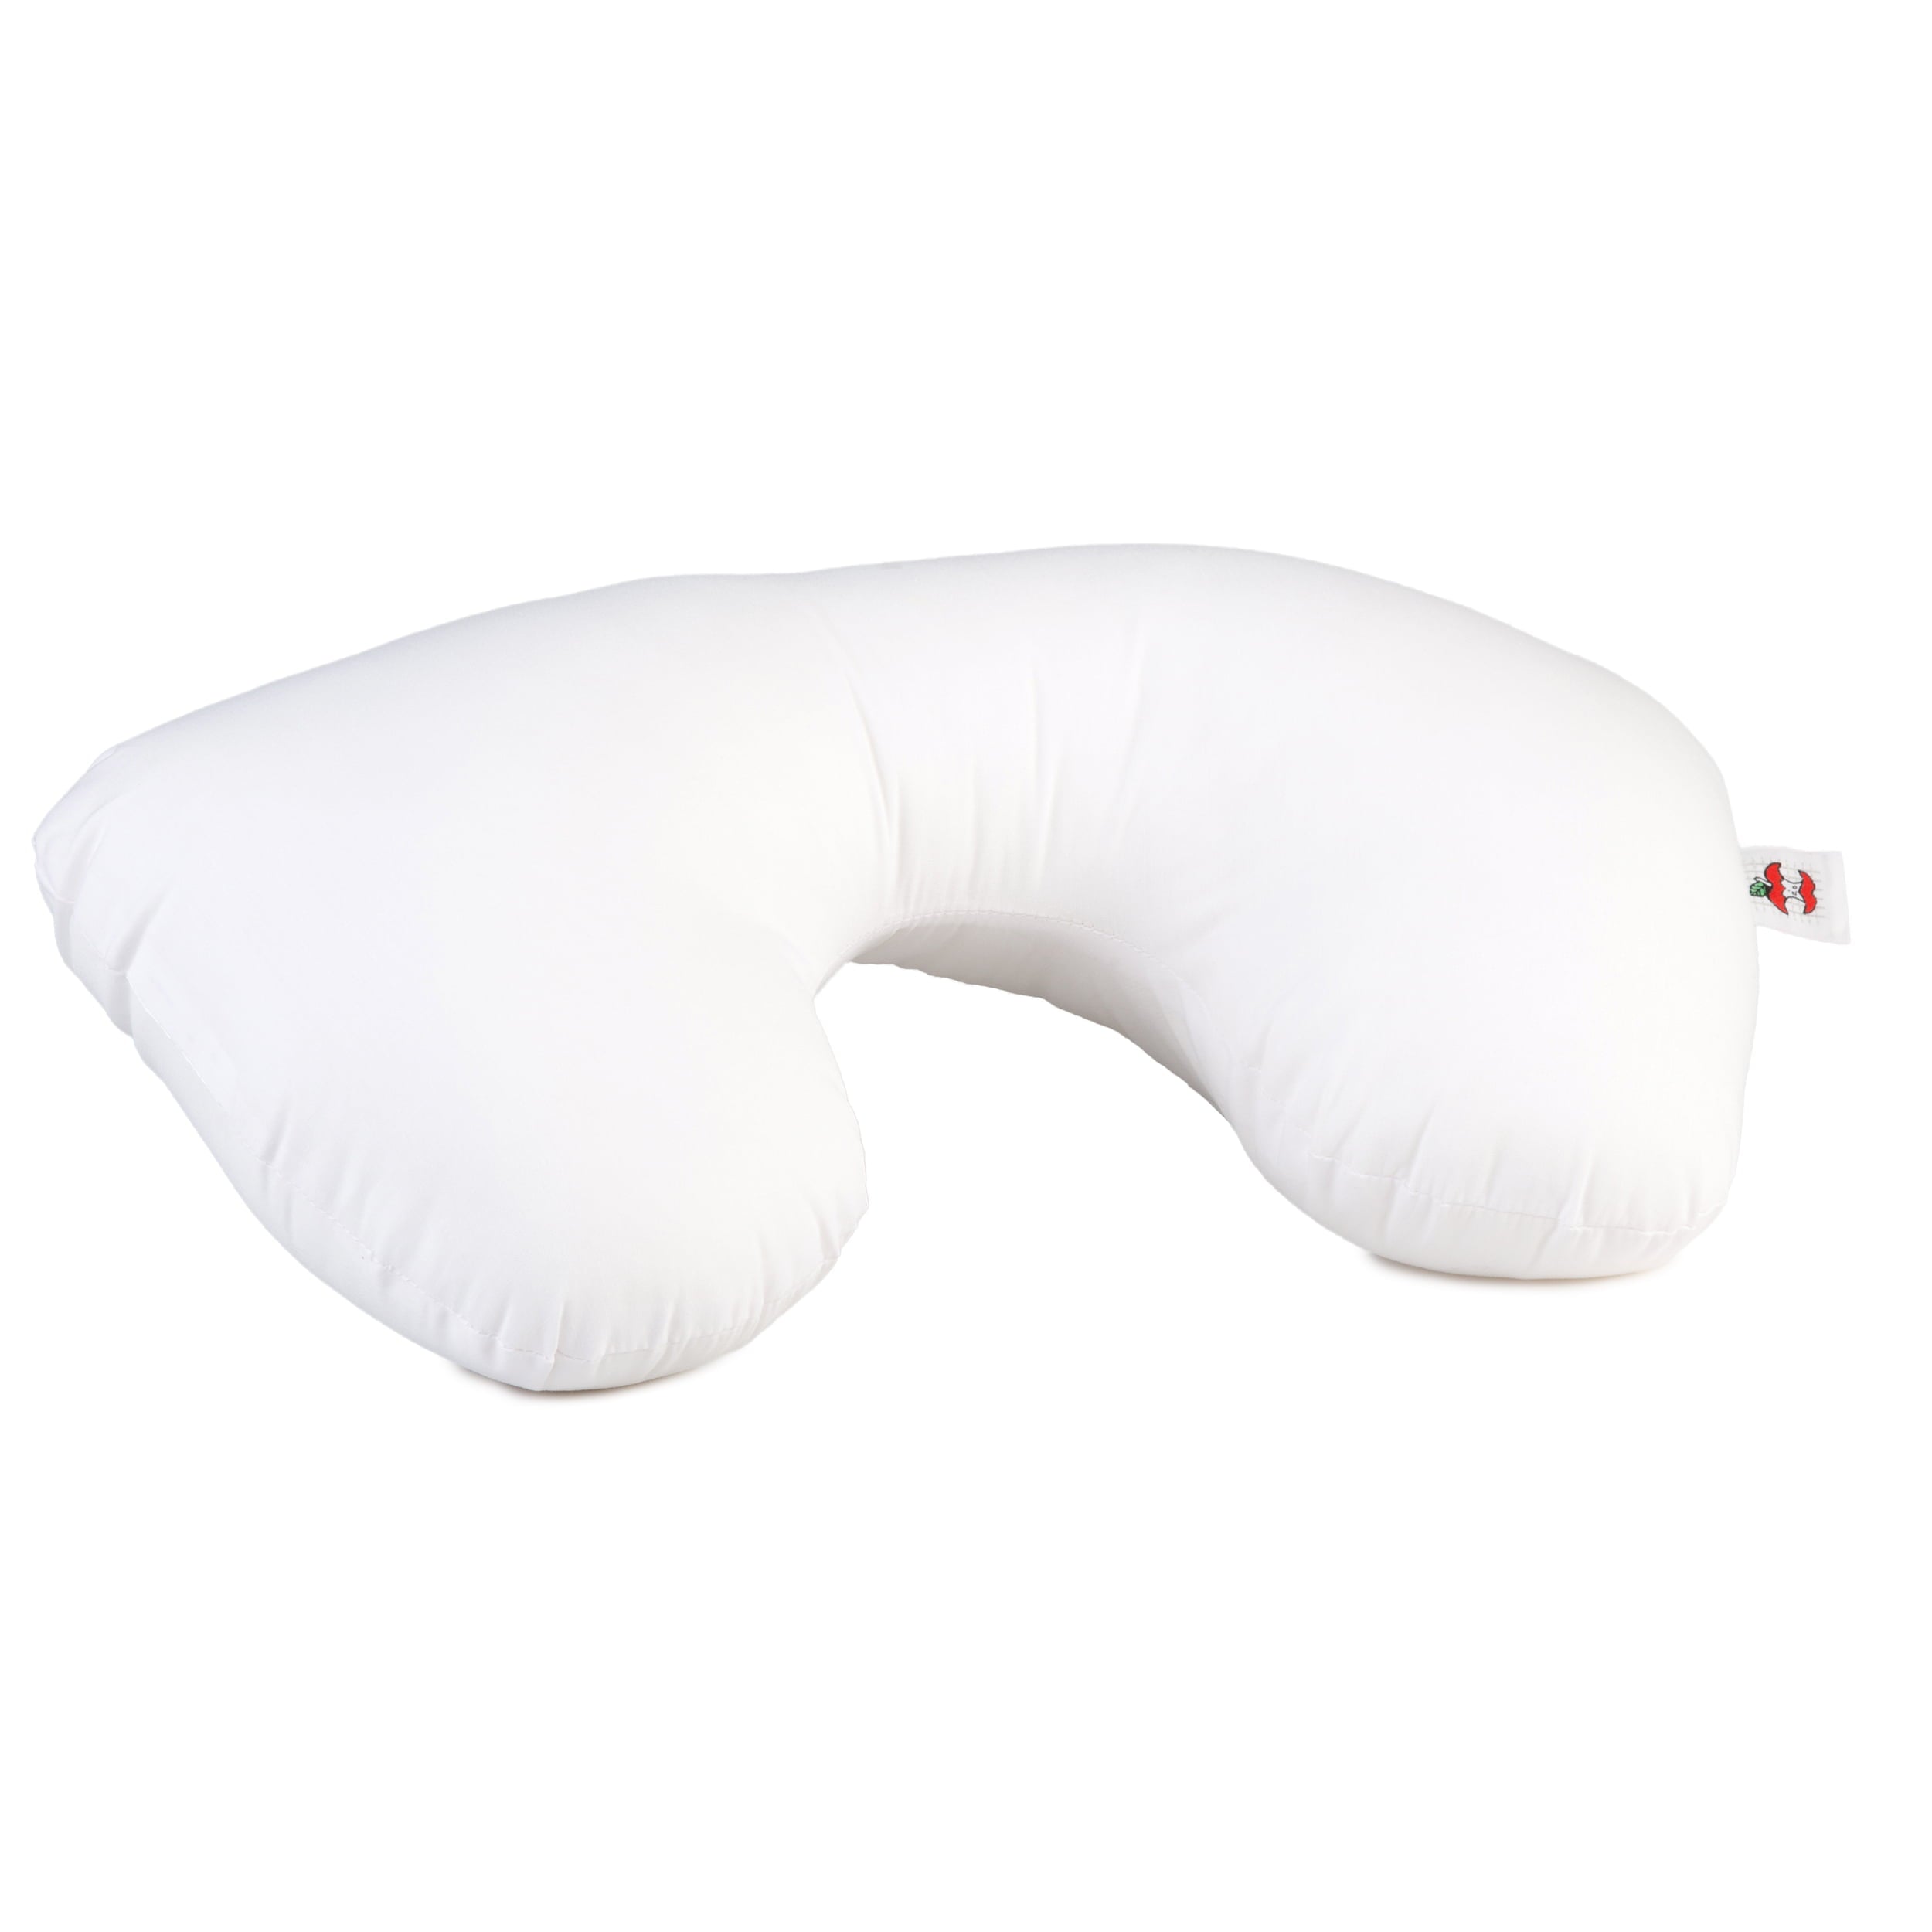 Core Products Travel Portable Cervical Neck & Head Support Sleep Pillow Headrest